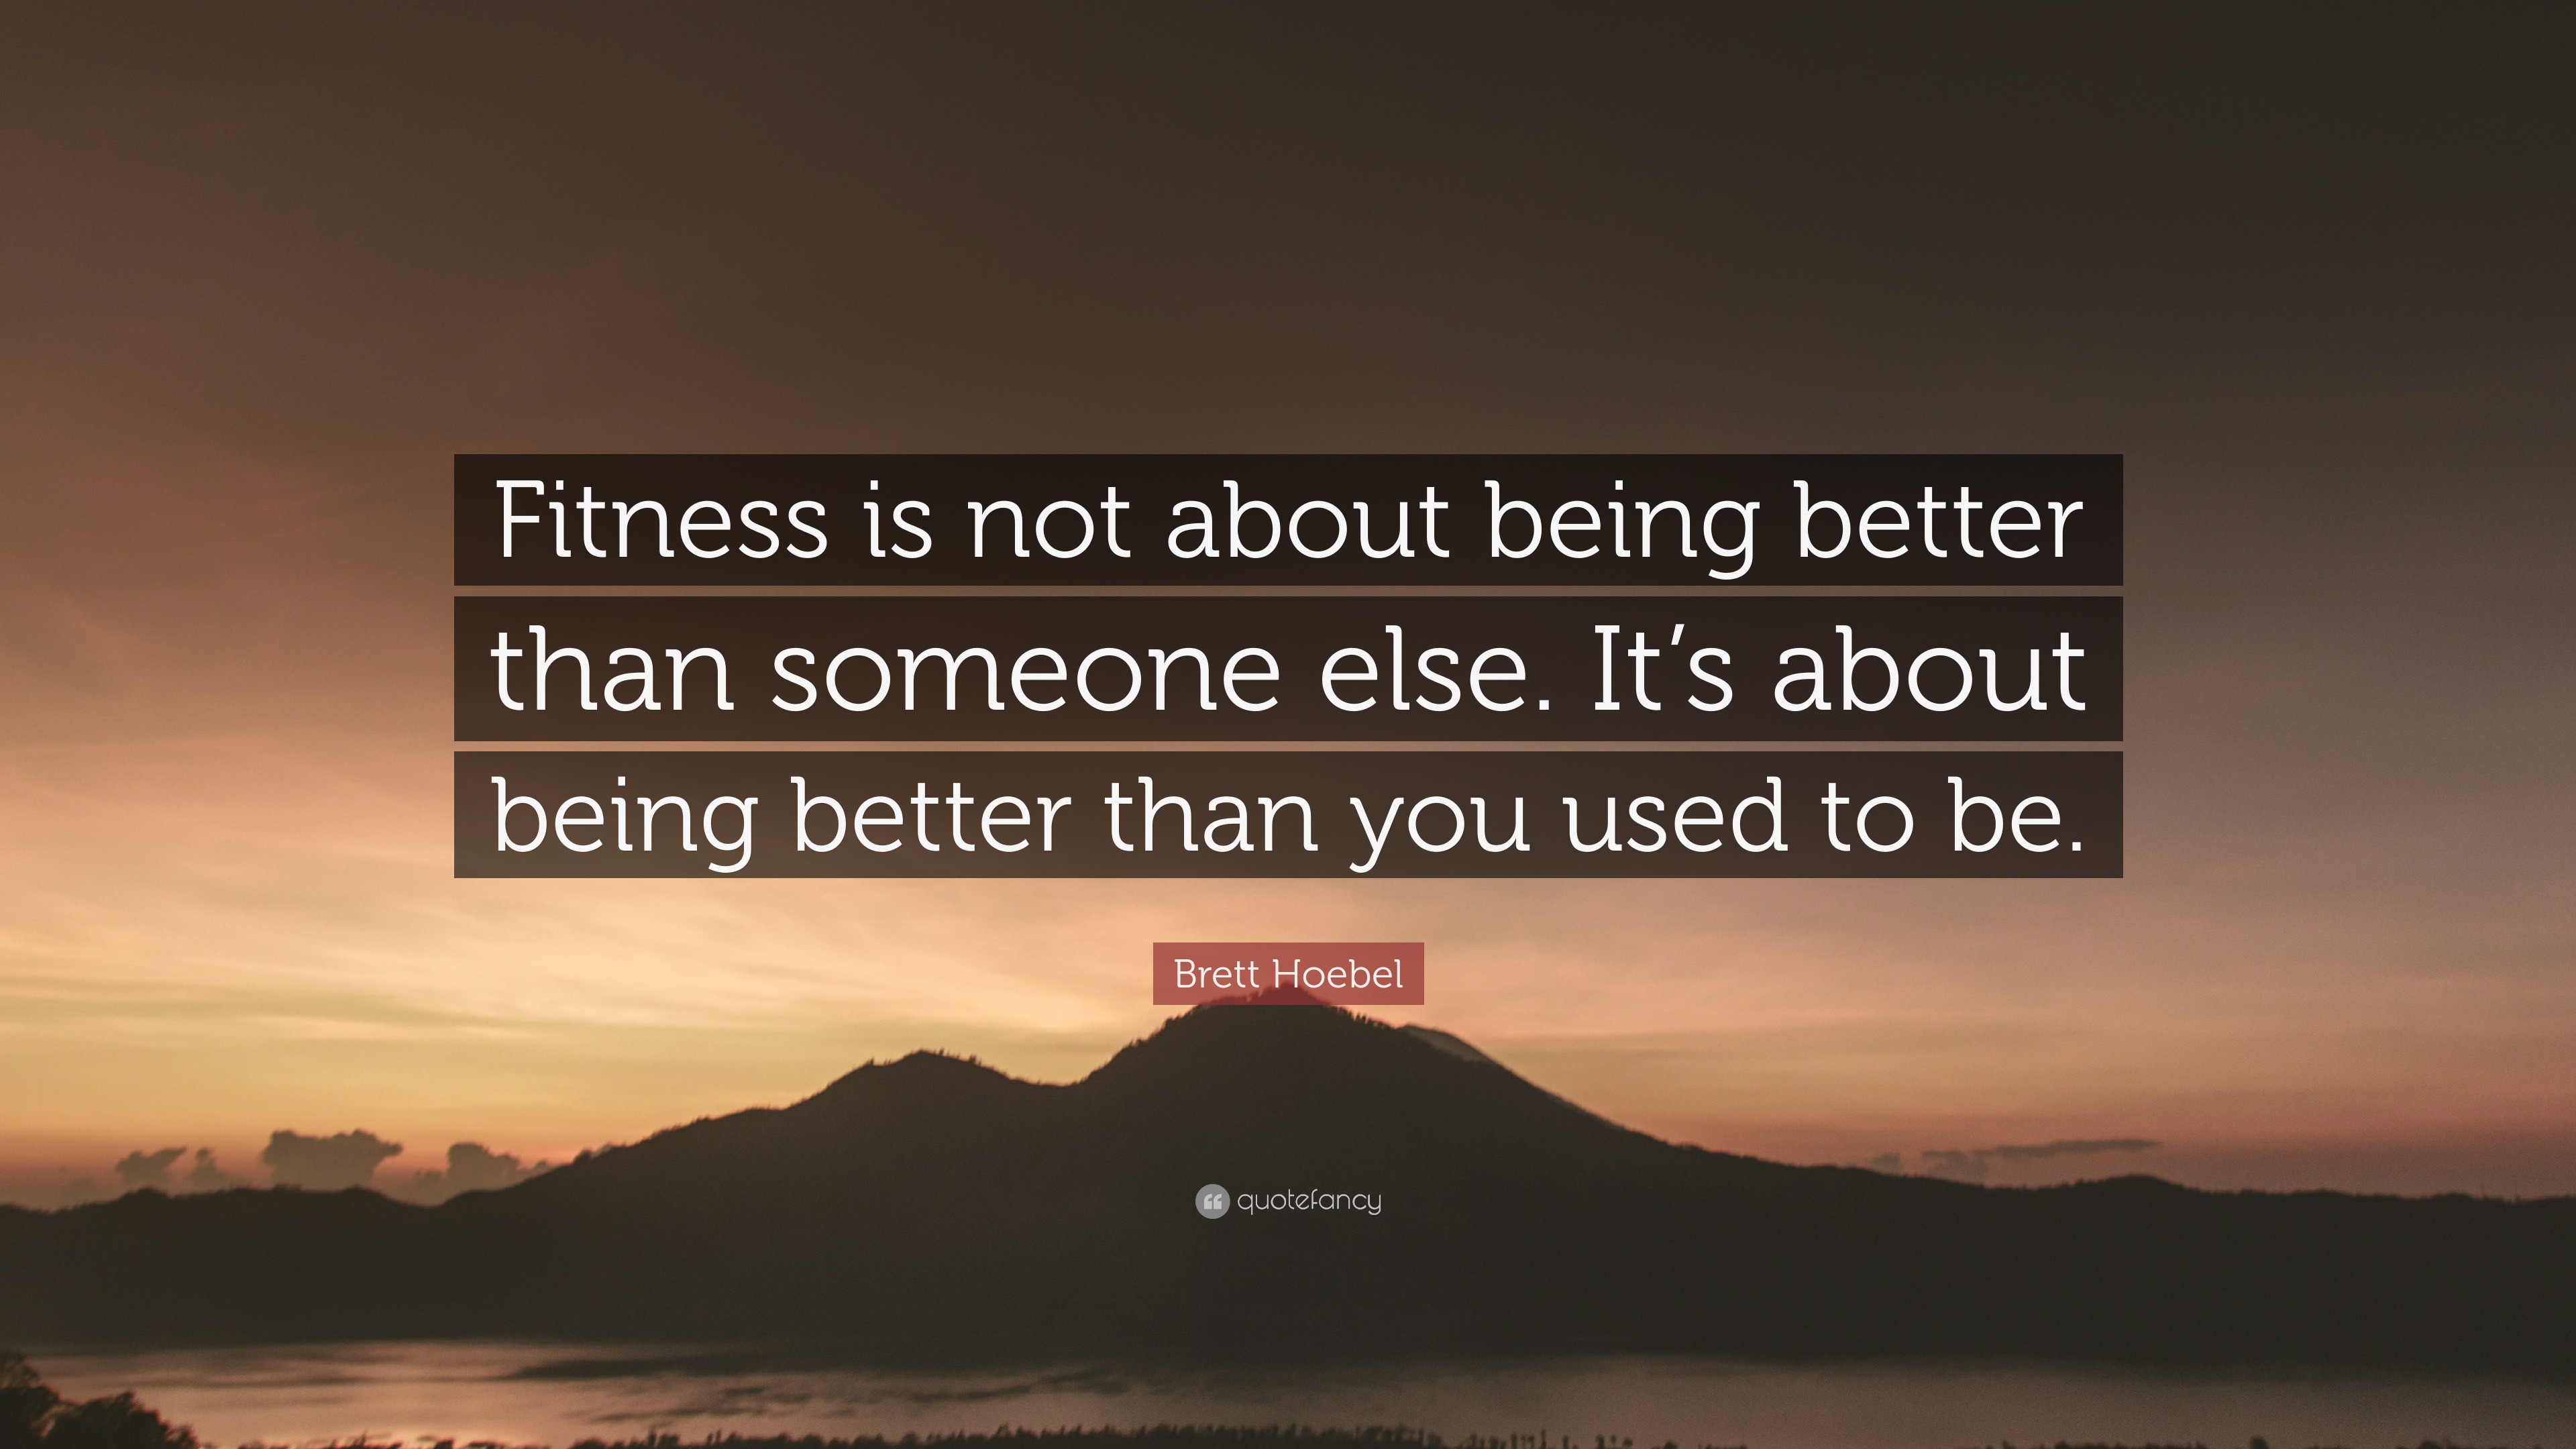 Brett Hoebel Quote: “Fitness is not about being better than someone ...